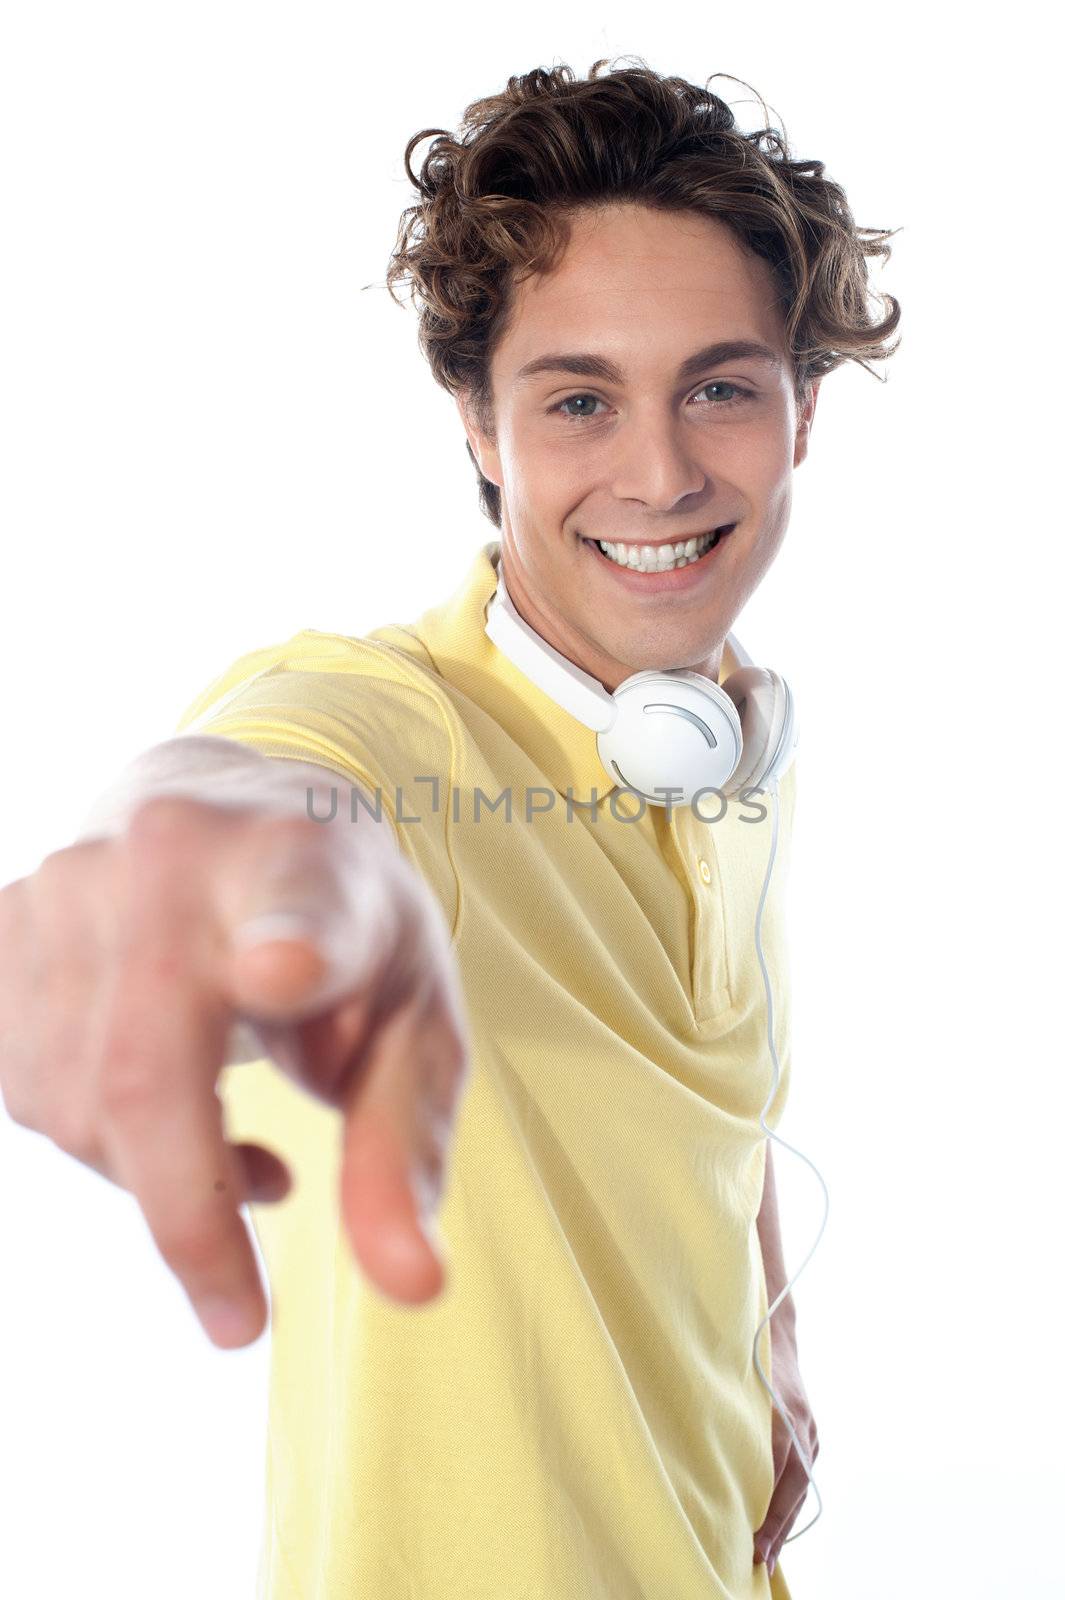 Guy with headphones enjoying music, pointing at you